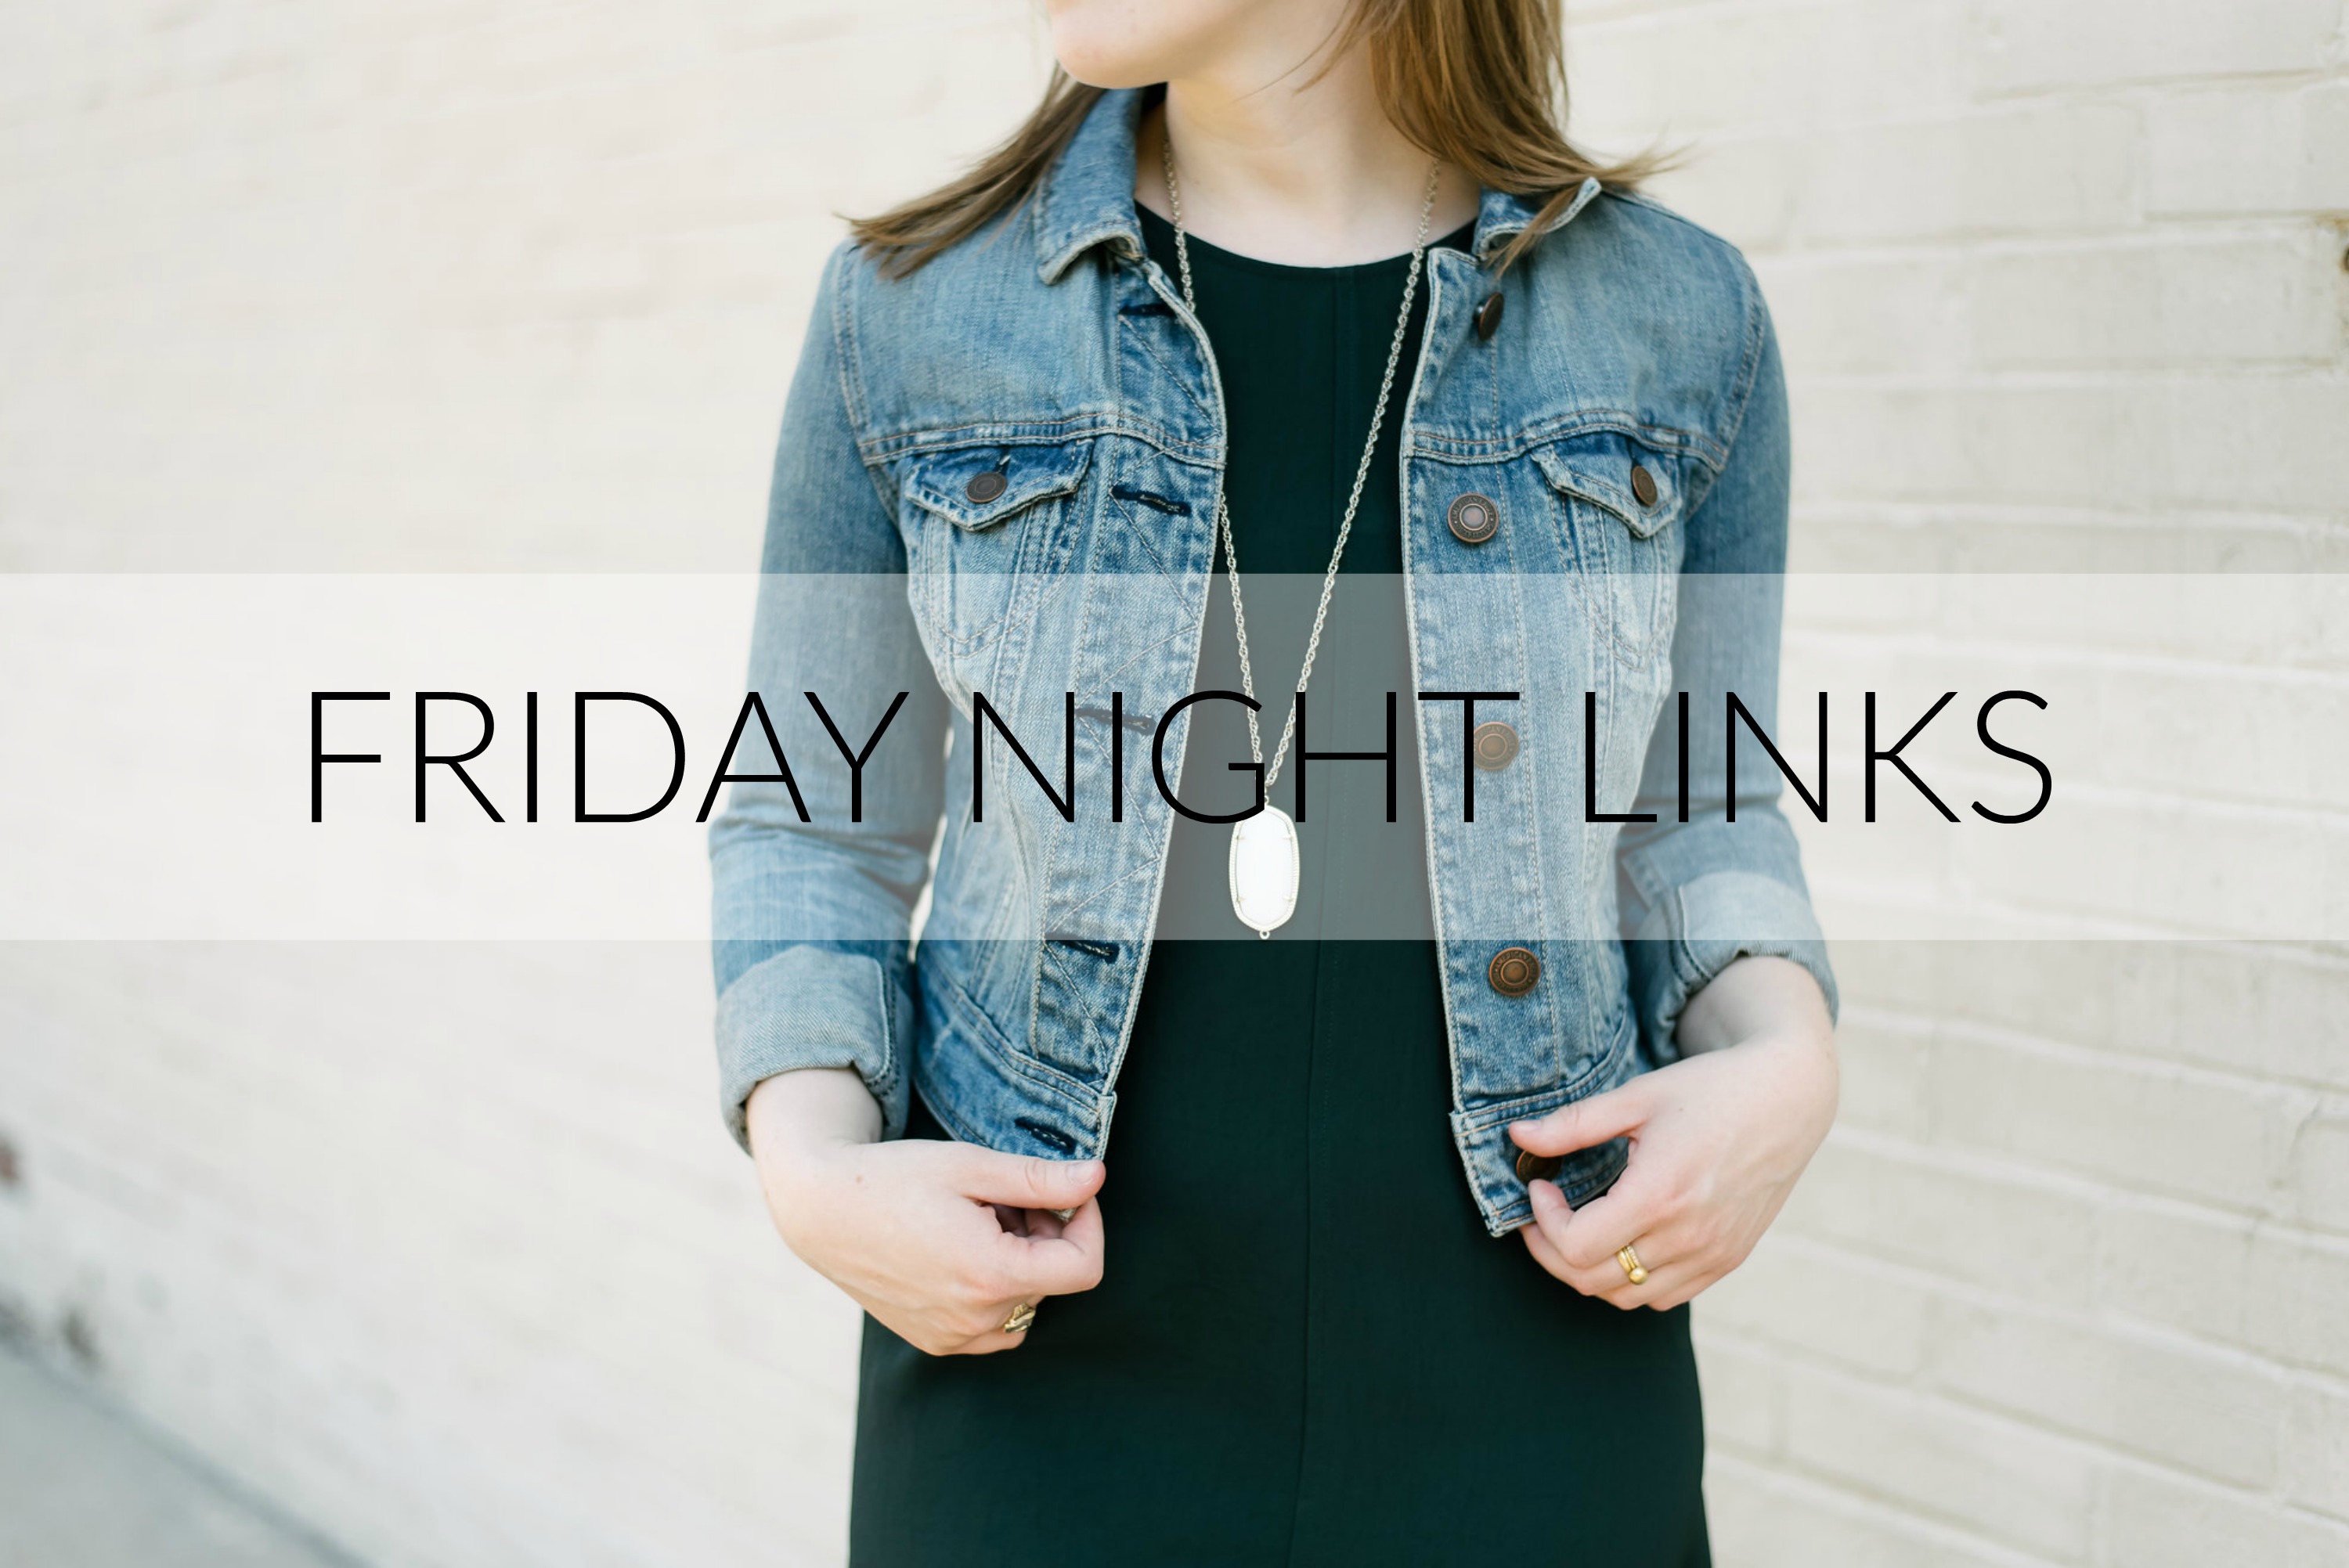 Friday Night Links | Something Good, girl wearing and holding jean jacket, weekend sales